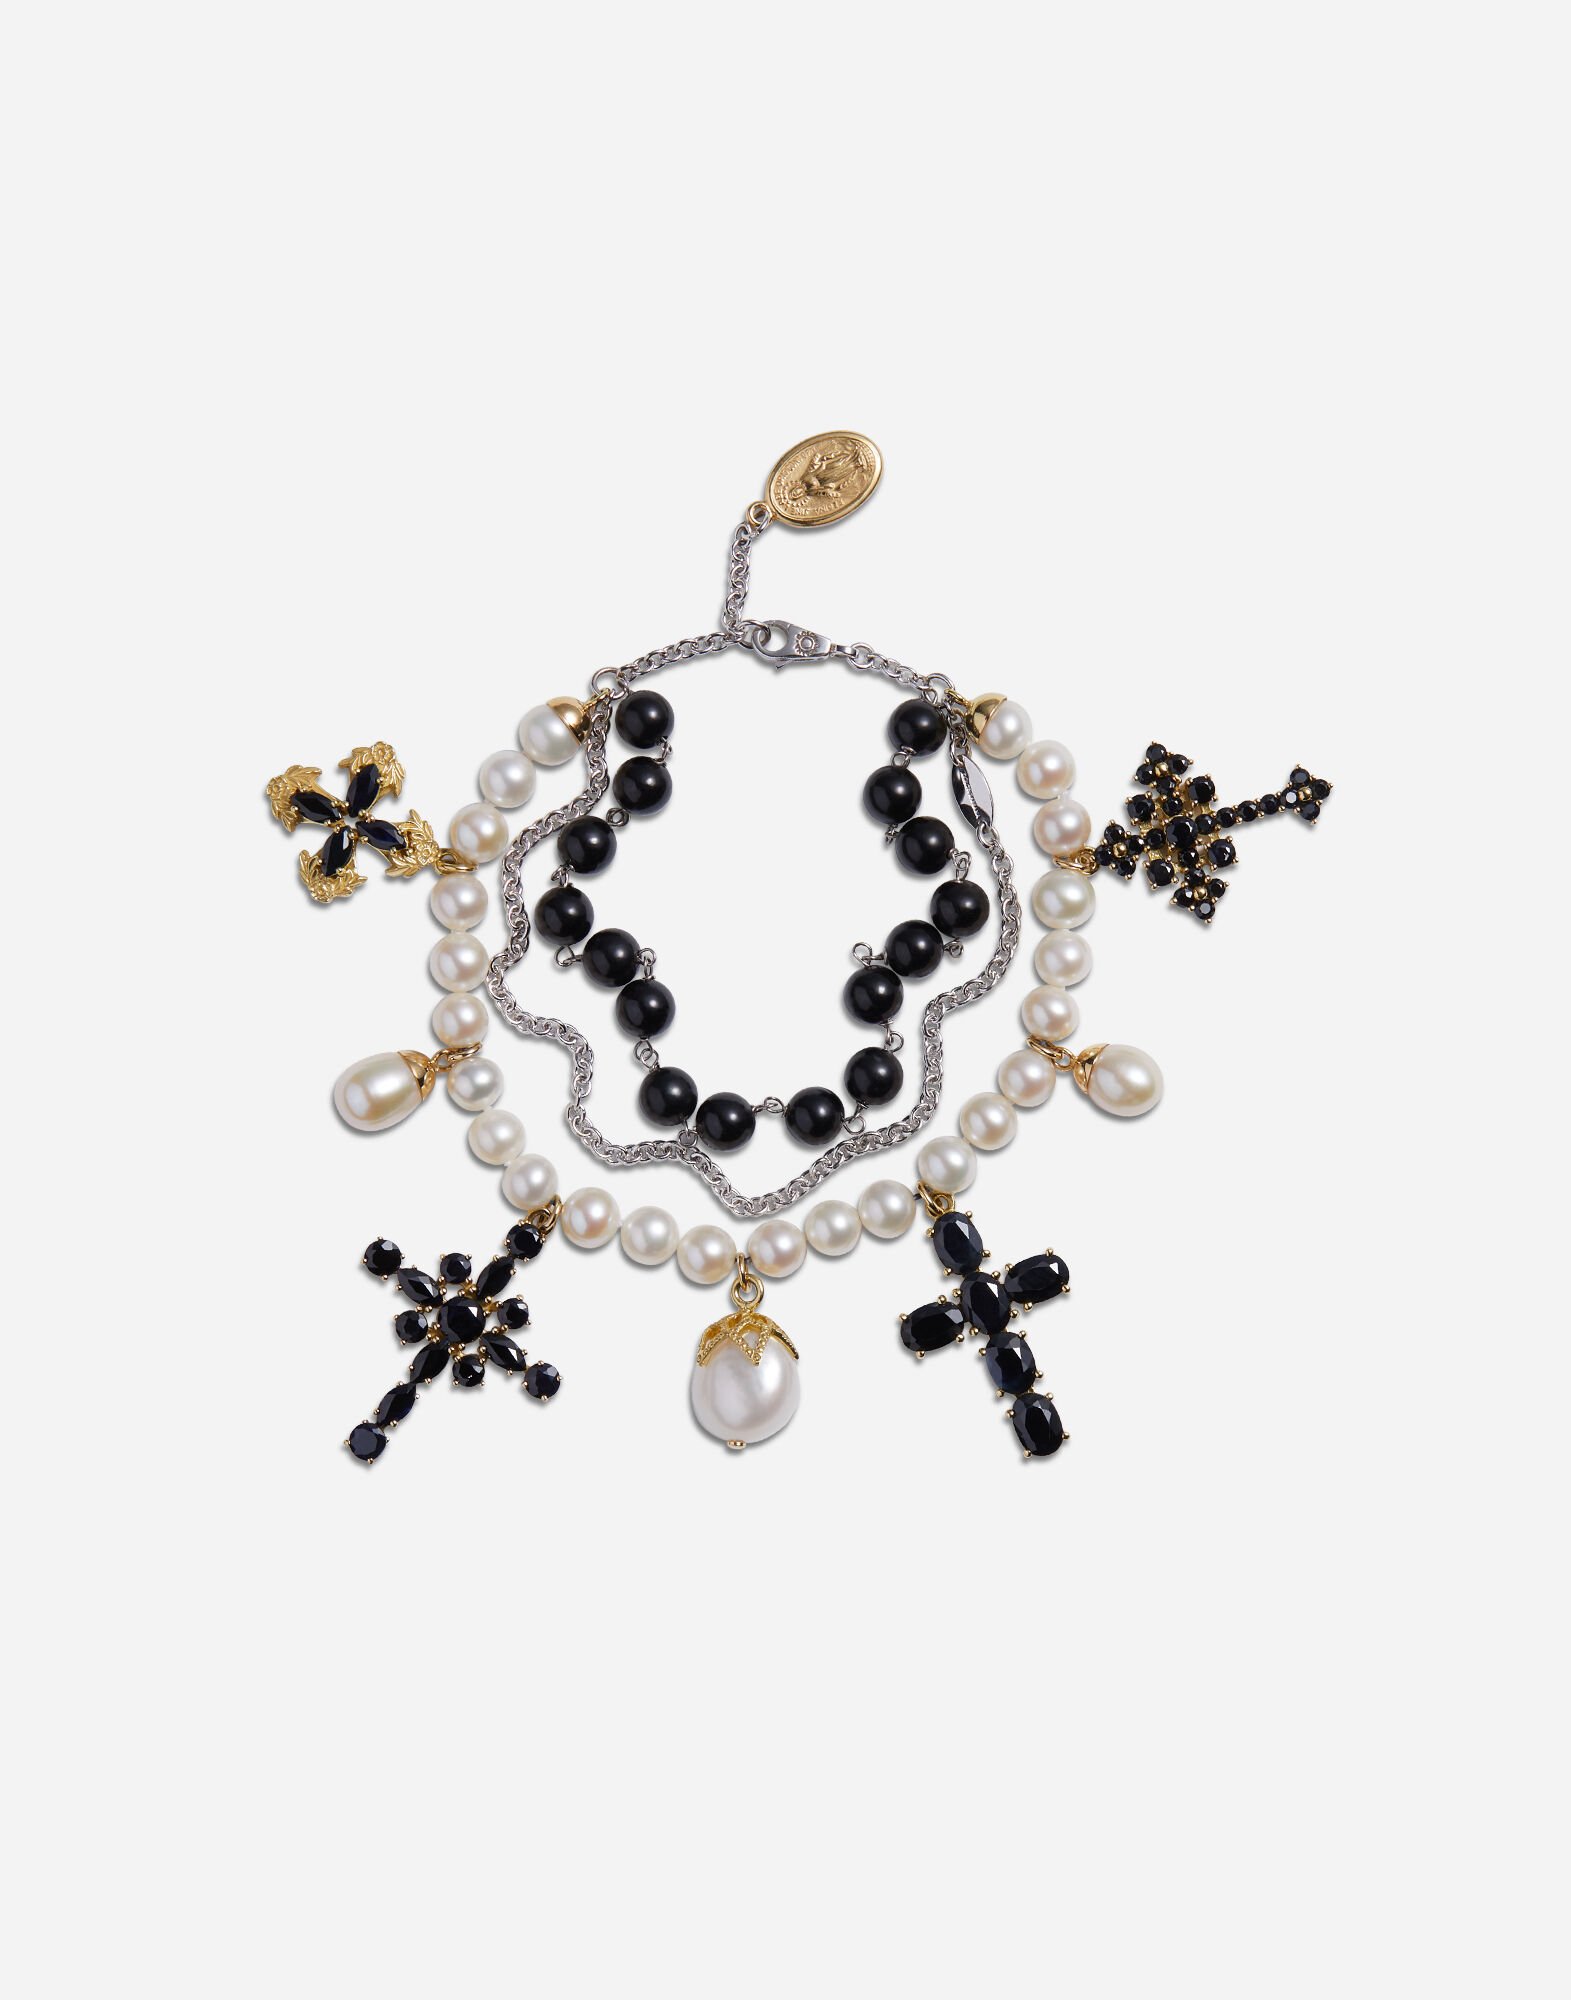 Dolce & Gabbana Yellow and white gold family bracelet with cblack sapphire, pearl and black jade beads Gold WADC2GW0001